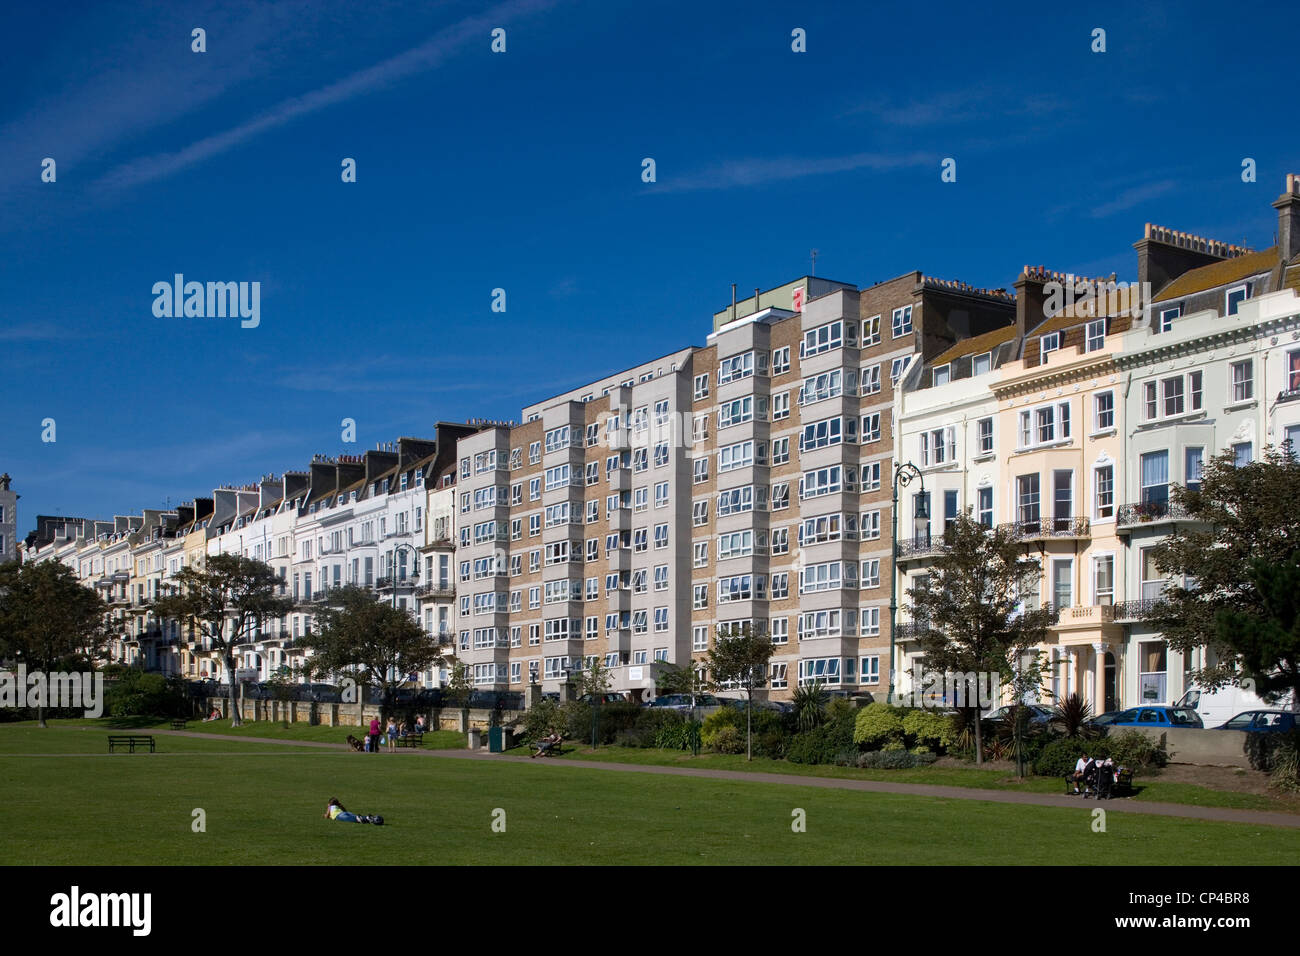 United Kingdom - England - East Sussex - Hastings. Traditional-style buildings in the city center Stock Photo